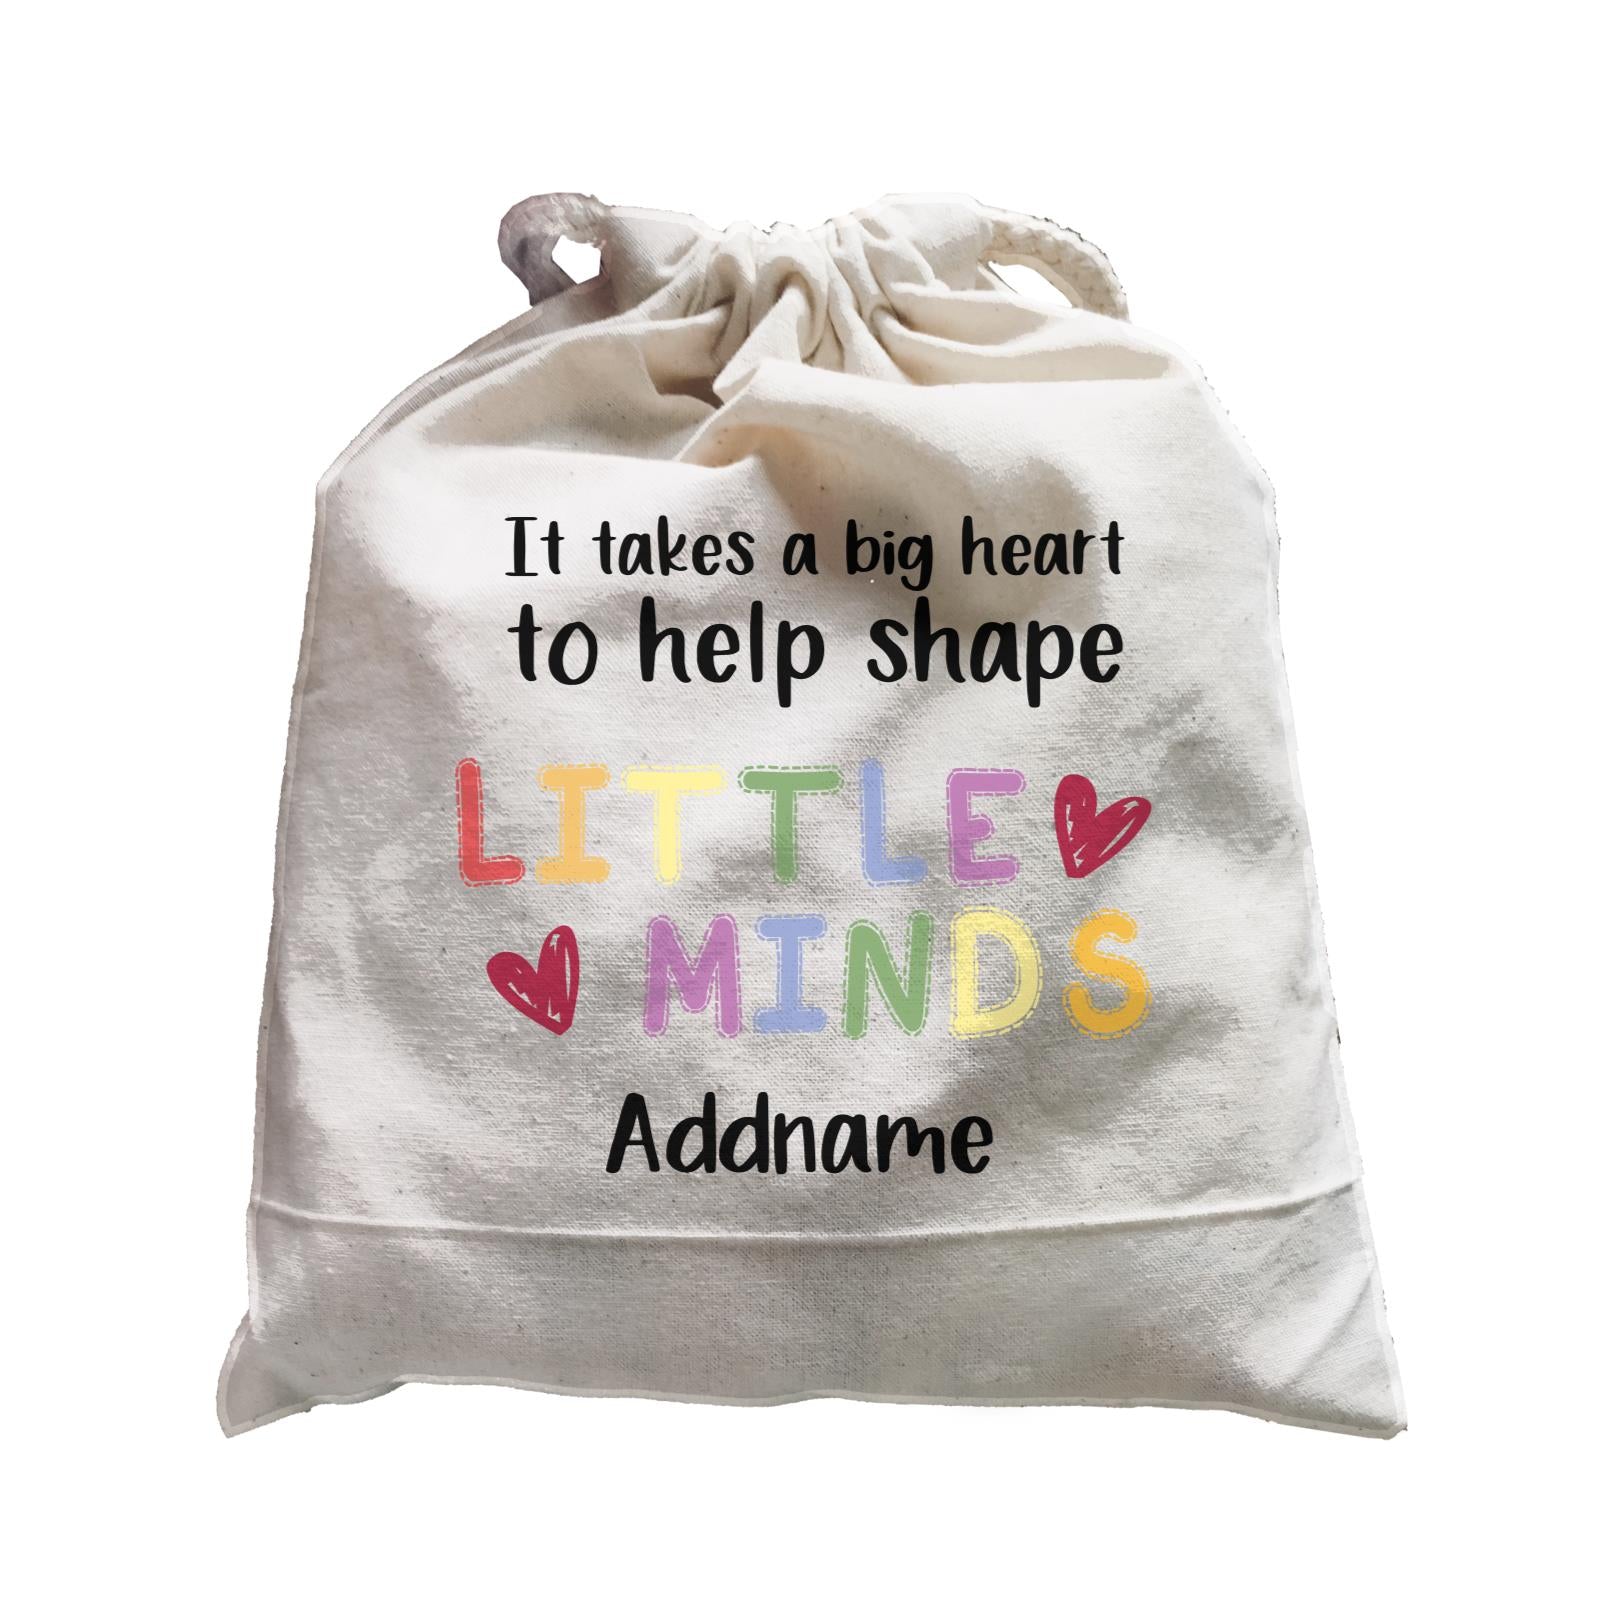 Teacher Quotes 2 It Takes A Big Heart To Help Shape Little Minds Addname Satchel